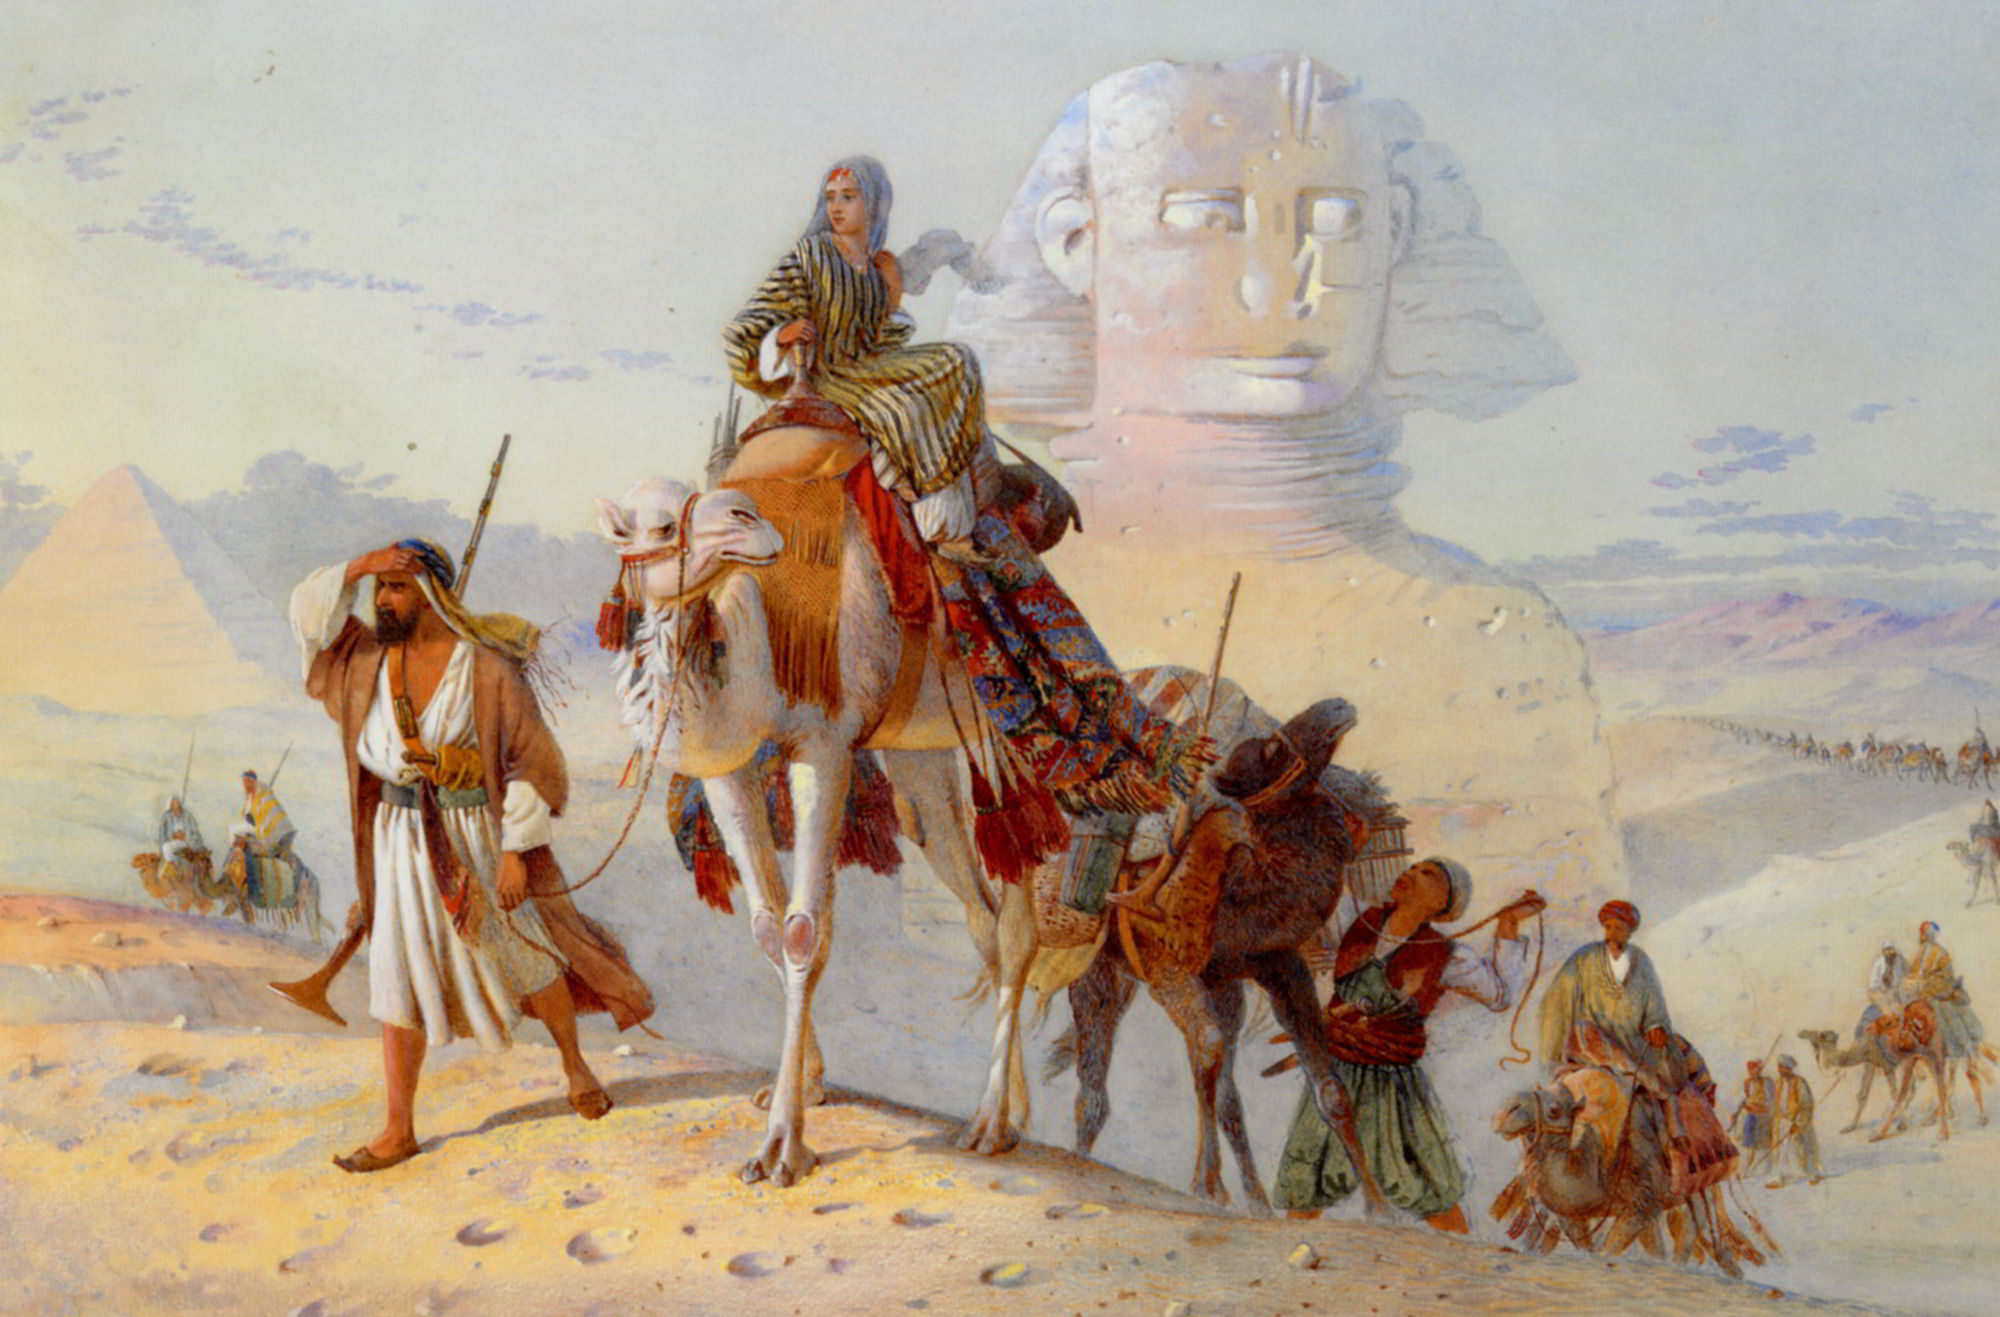 A Caravan with the Pyramids and Sphinx Beyond by Joseph Austin Benwell